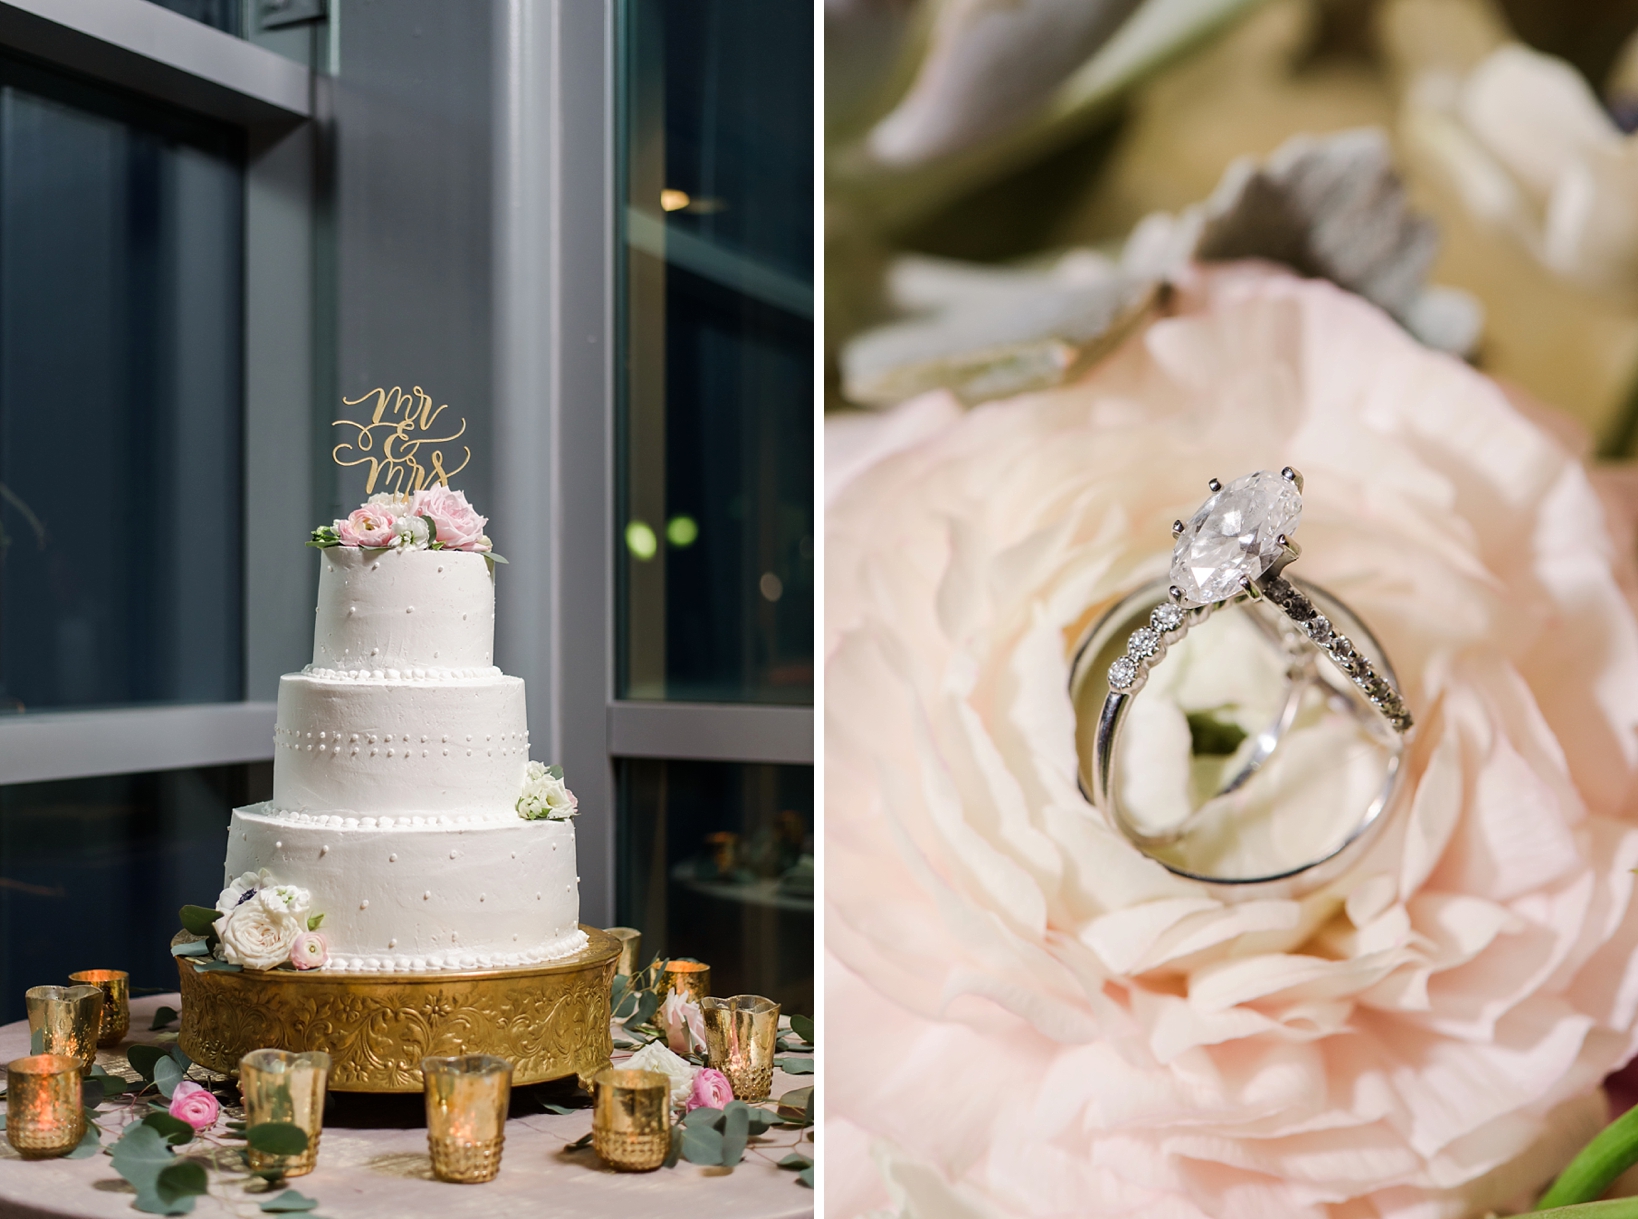 The wedding cake and the wedding bands by Sarah & Ben Photography